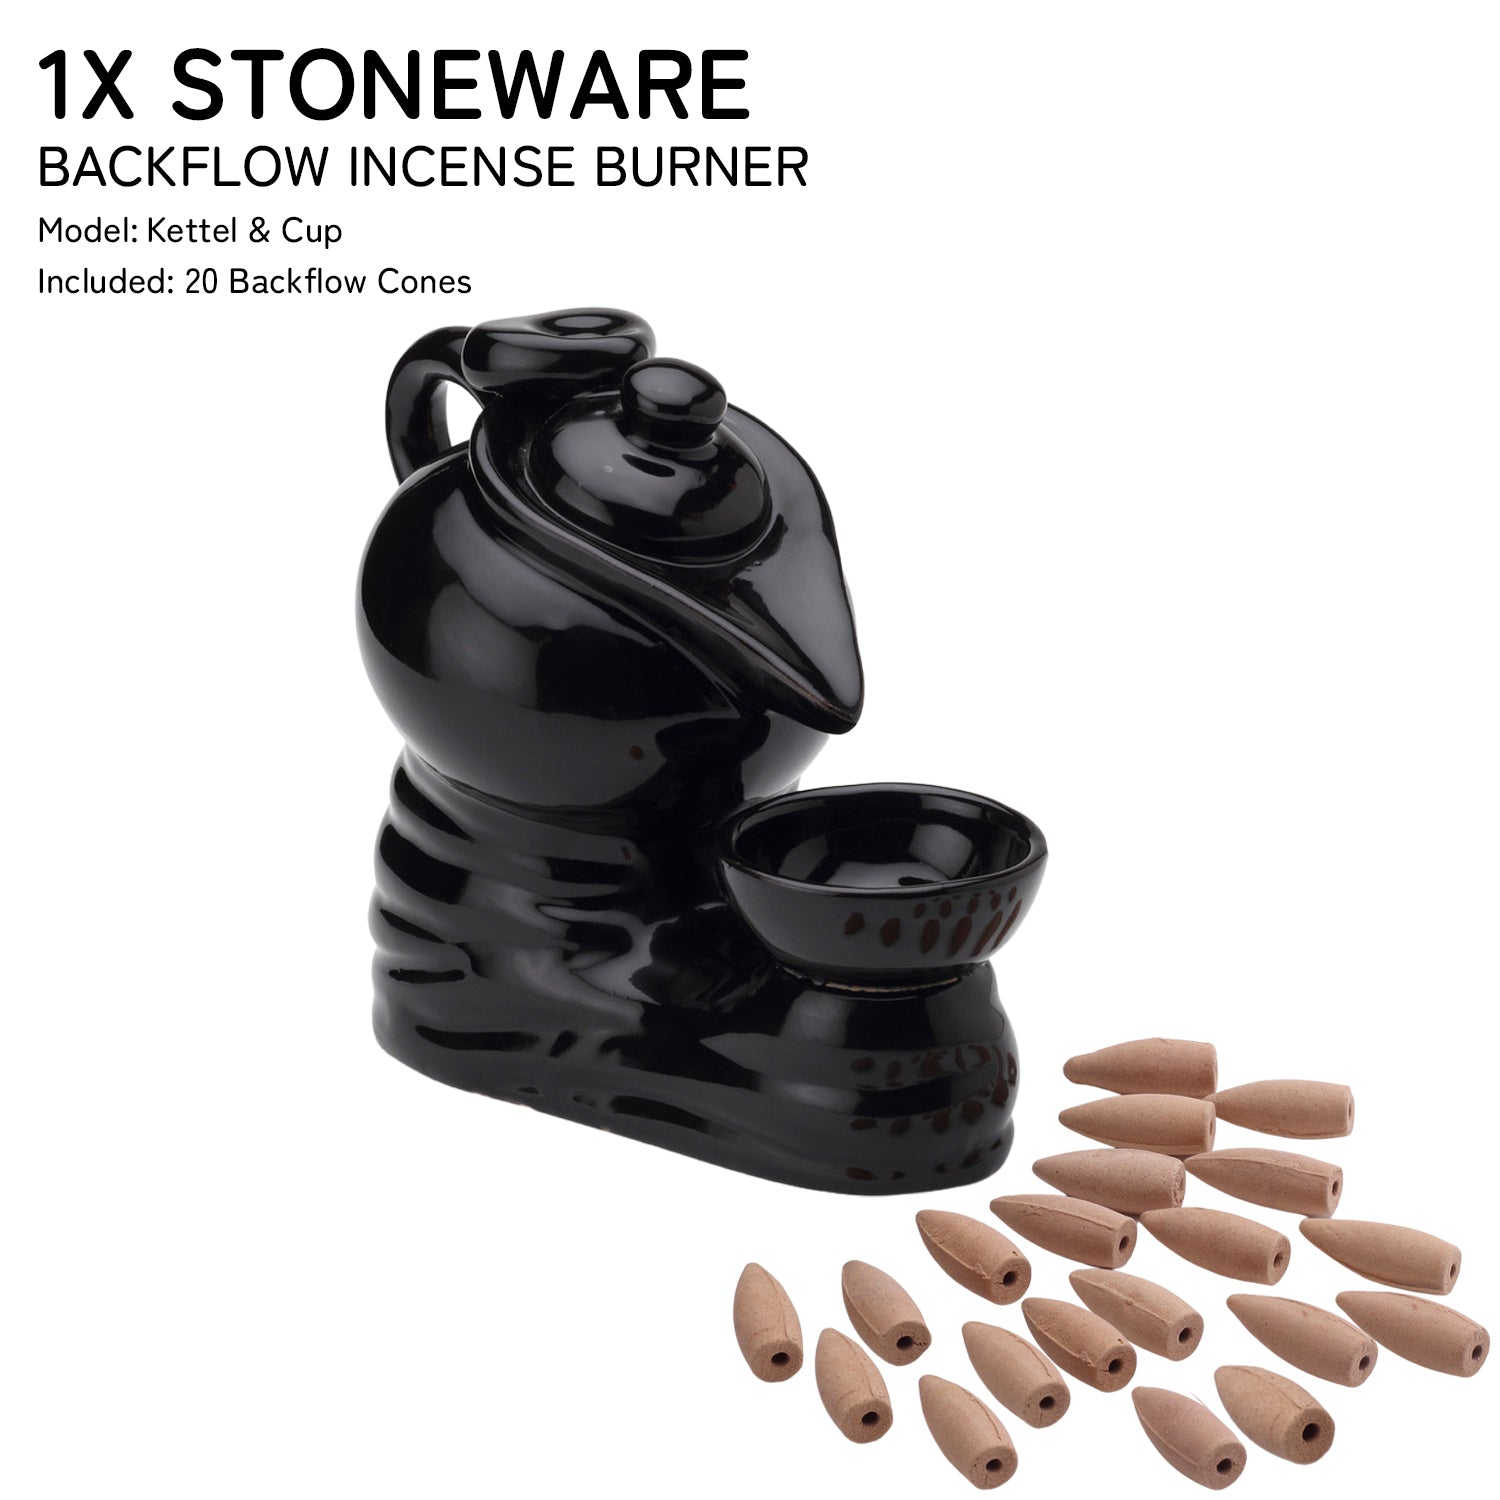 Tea Pot Smoke Fountain Back Flow Incense Burner With 20 Incense Cones